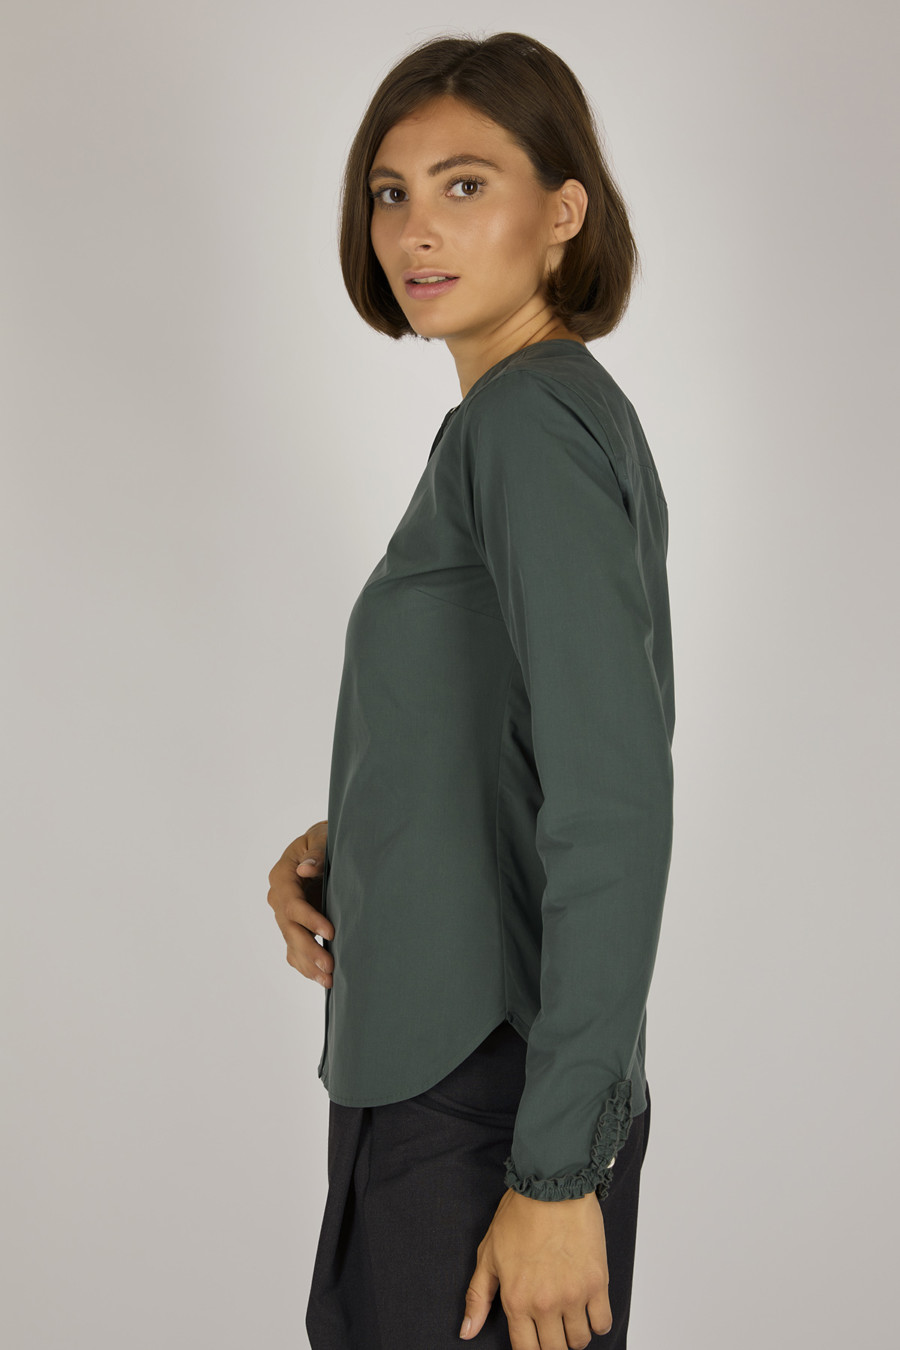 EASY – Waisted blouse with flat stand-up collar – Color: Moss